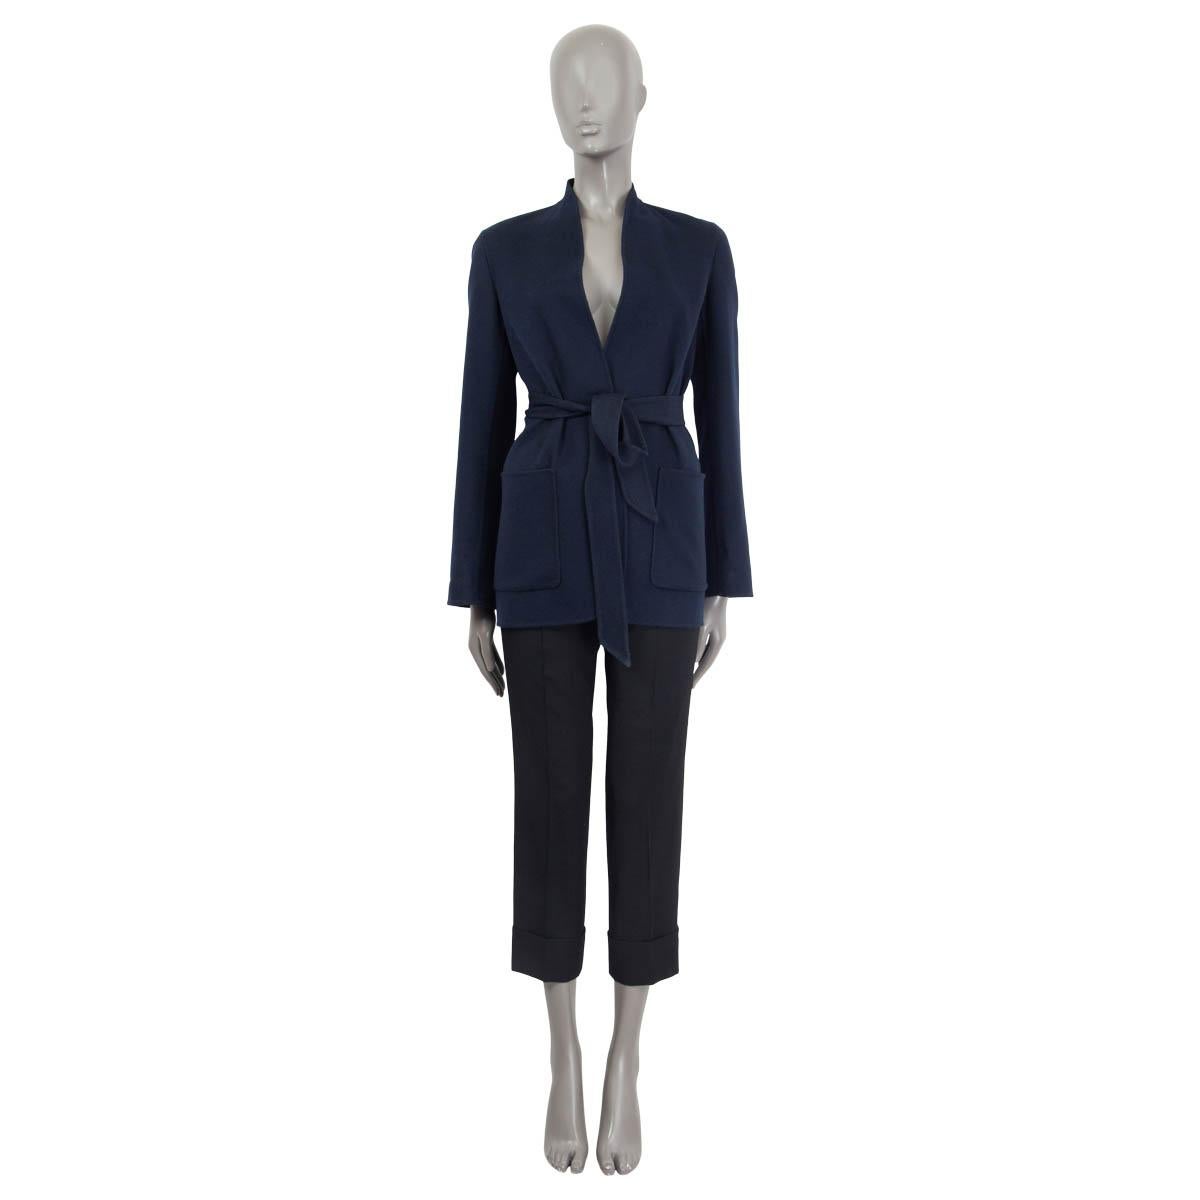 100% authentic Loro Piana light cardigan jacket in navy blue cashmere (100%). Features a detachable self-tie belt and two patch pockets on the front. Unlined. Has been worn and is in excellent condition.

Measurements
Tag Size	38
Size	XS
Shoulder